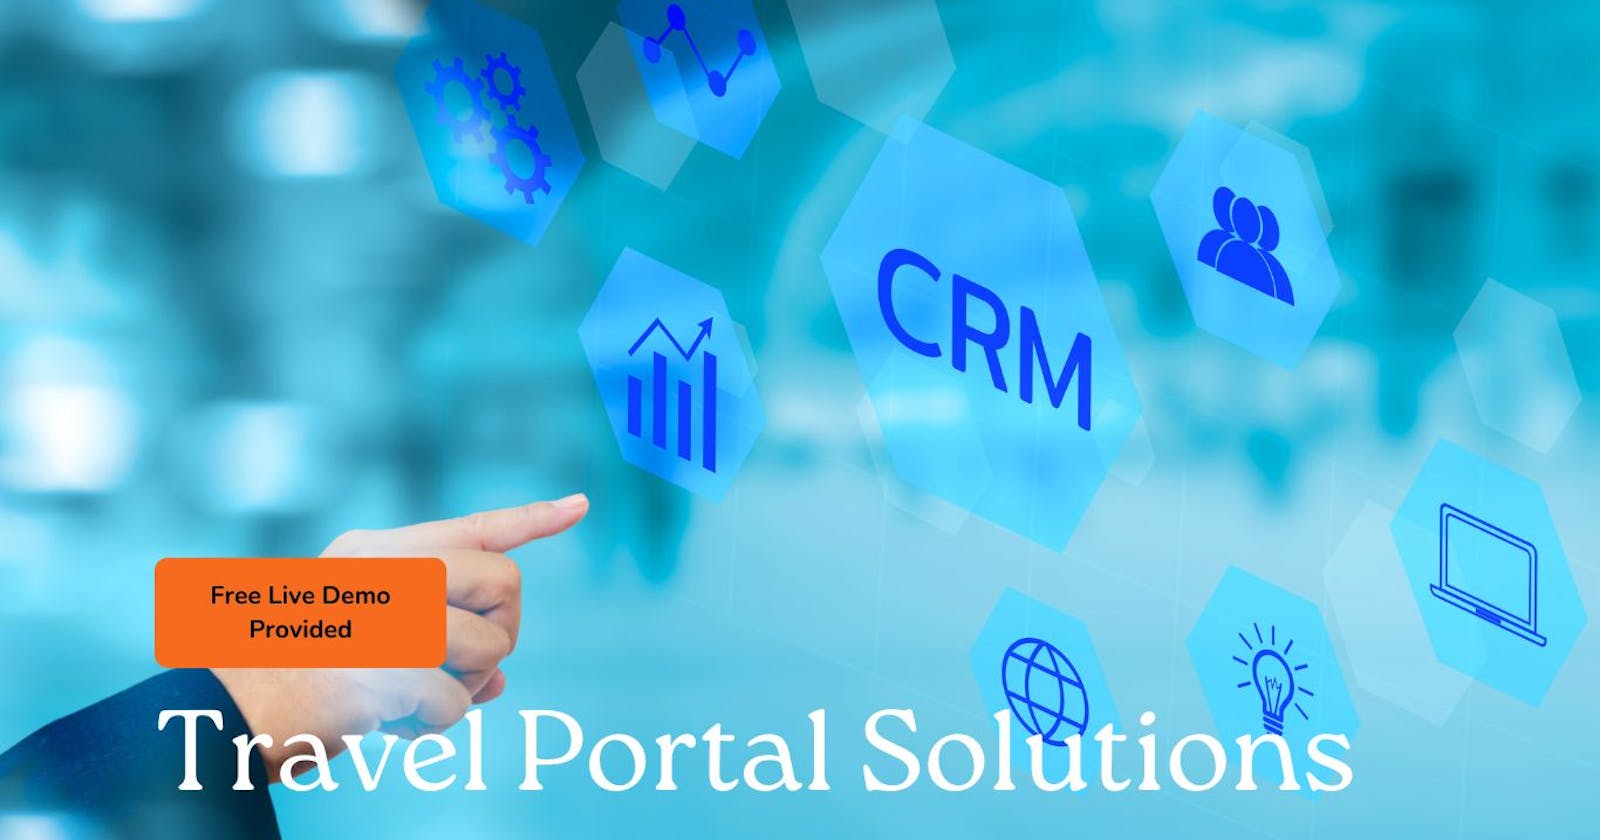 What Are Travel Portal Solutions?